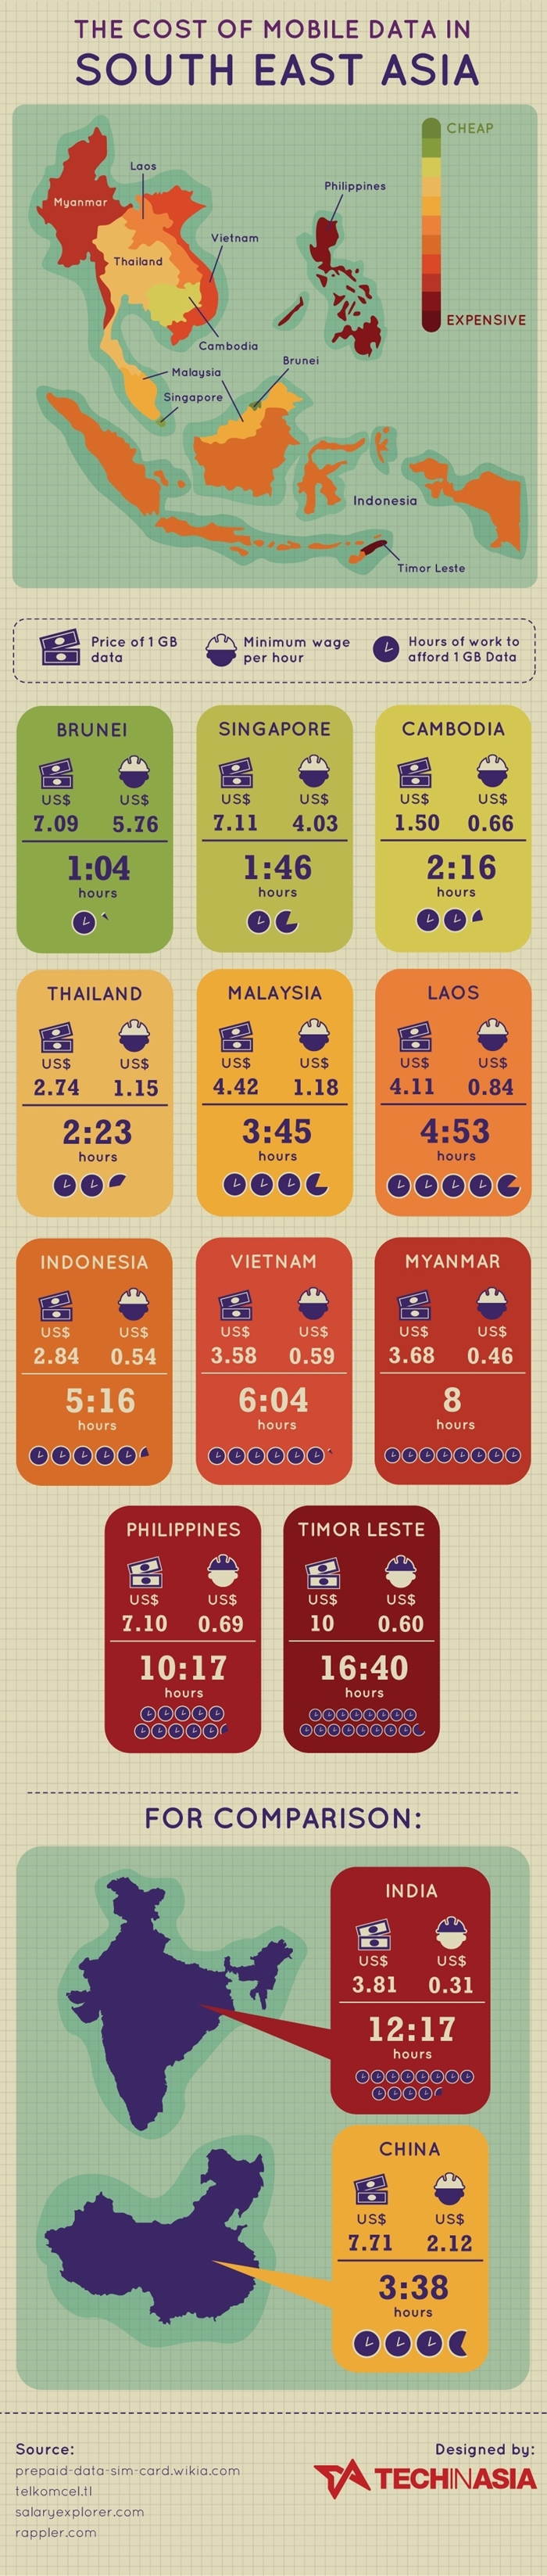 infographic-cost-of-mobile-data-sea-700